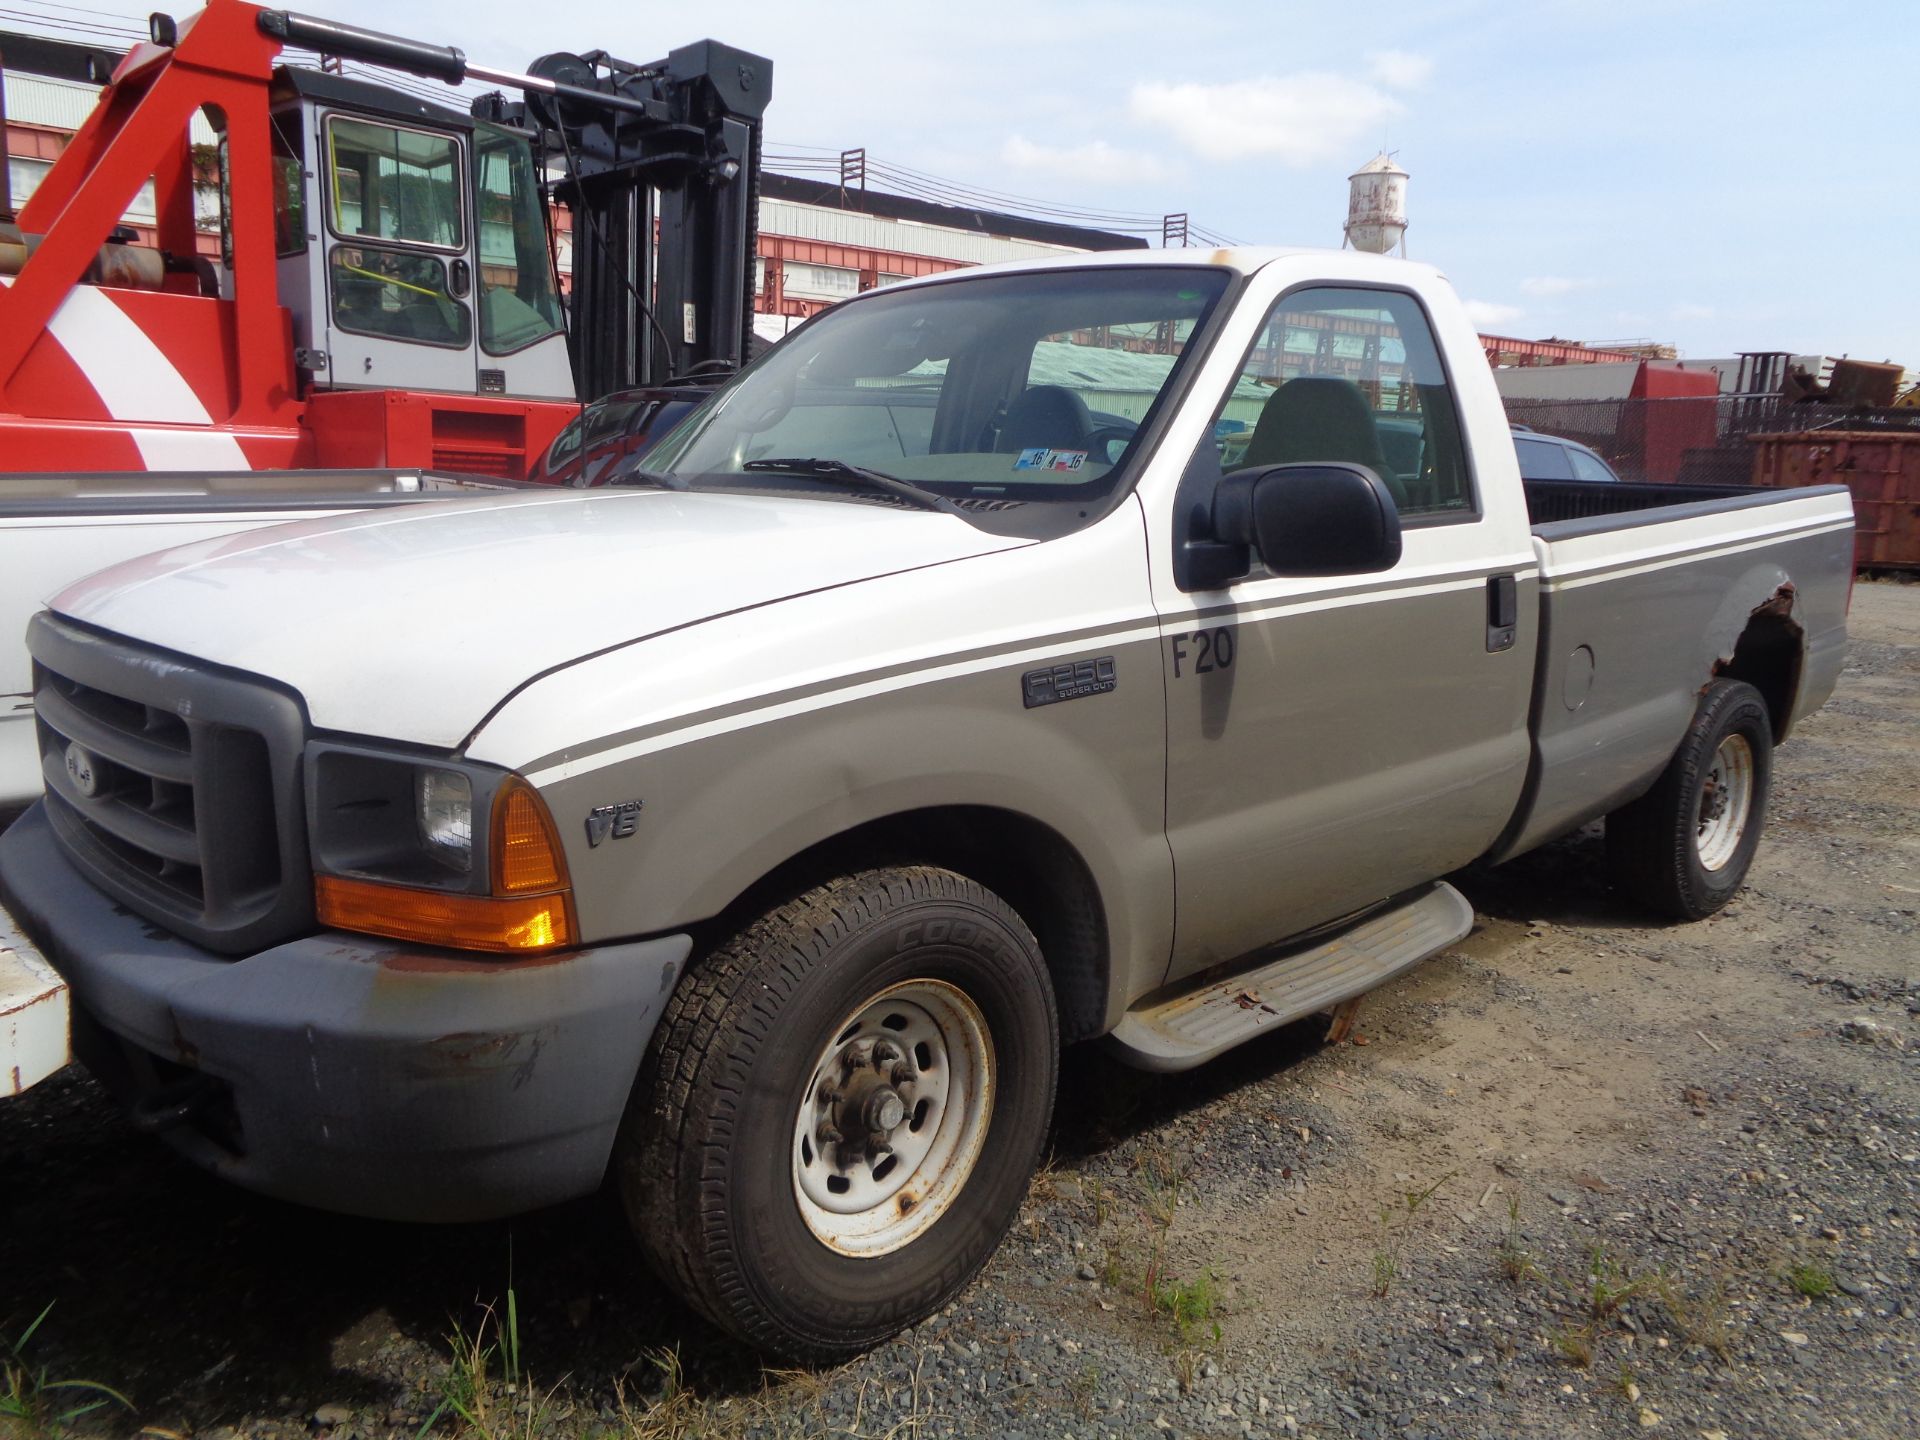 2000 Ford F250 Pick Up Truck - Image 2 of 8